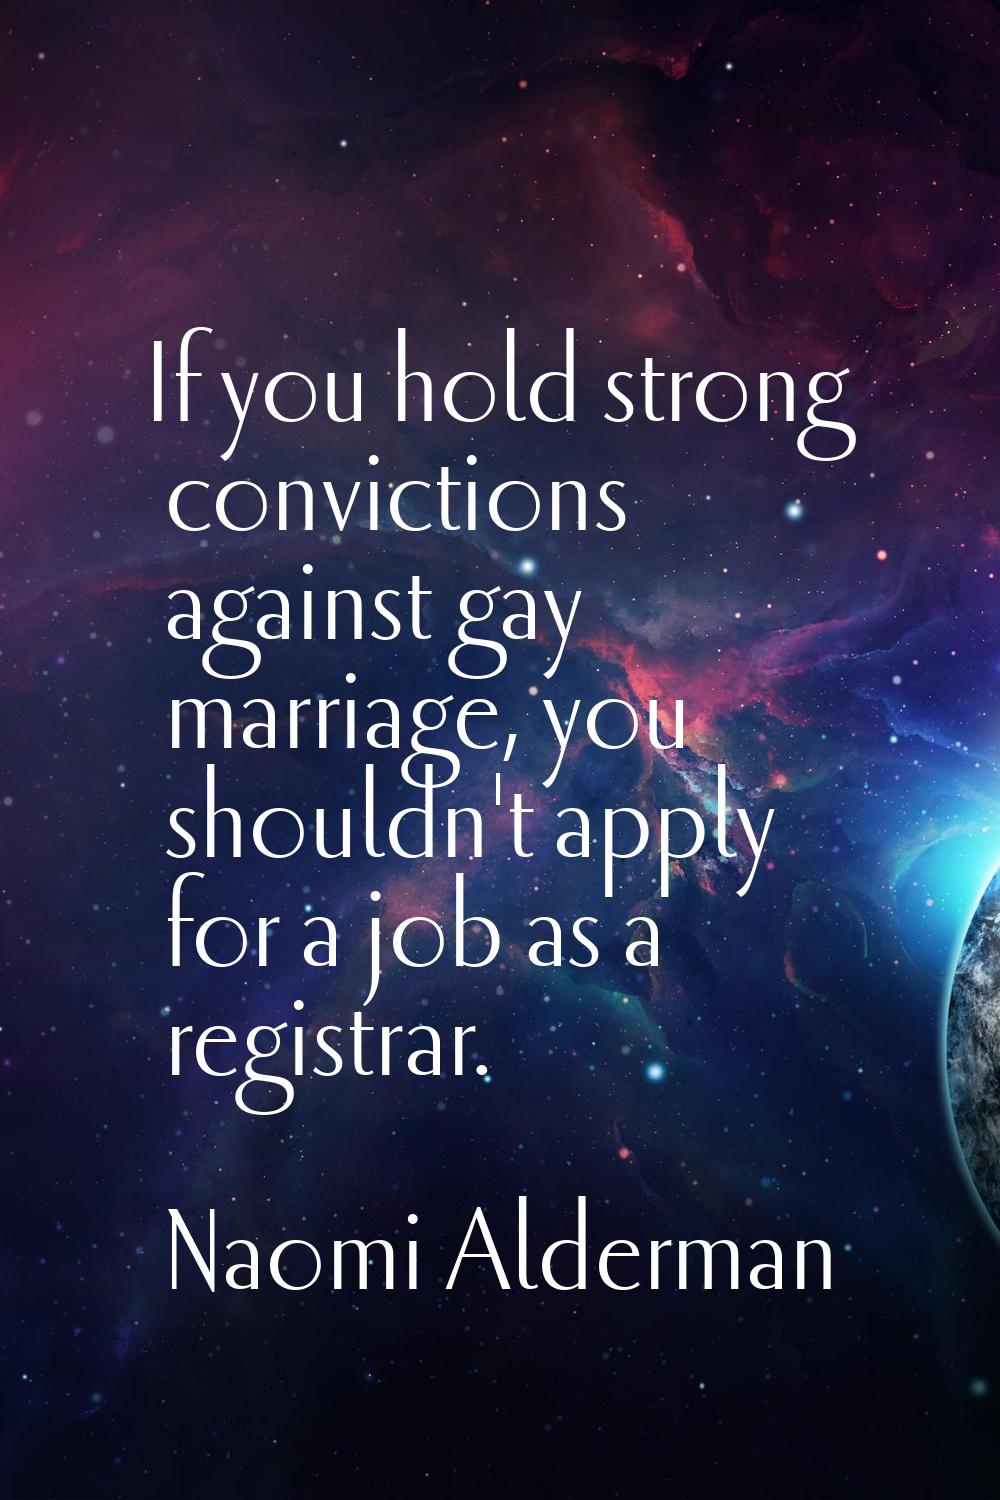 If you hold strong convictions against gay marriage, you shouldn't apply for a job as a registrar.